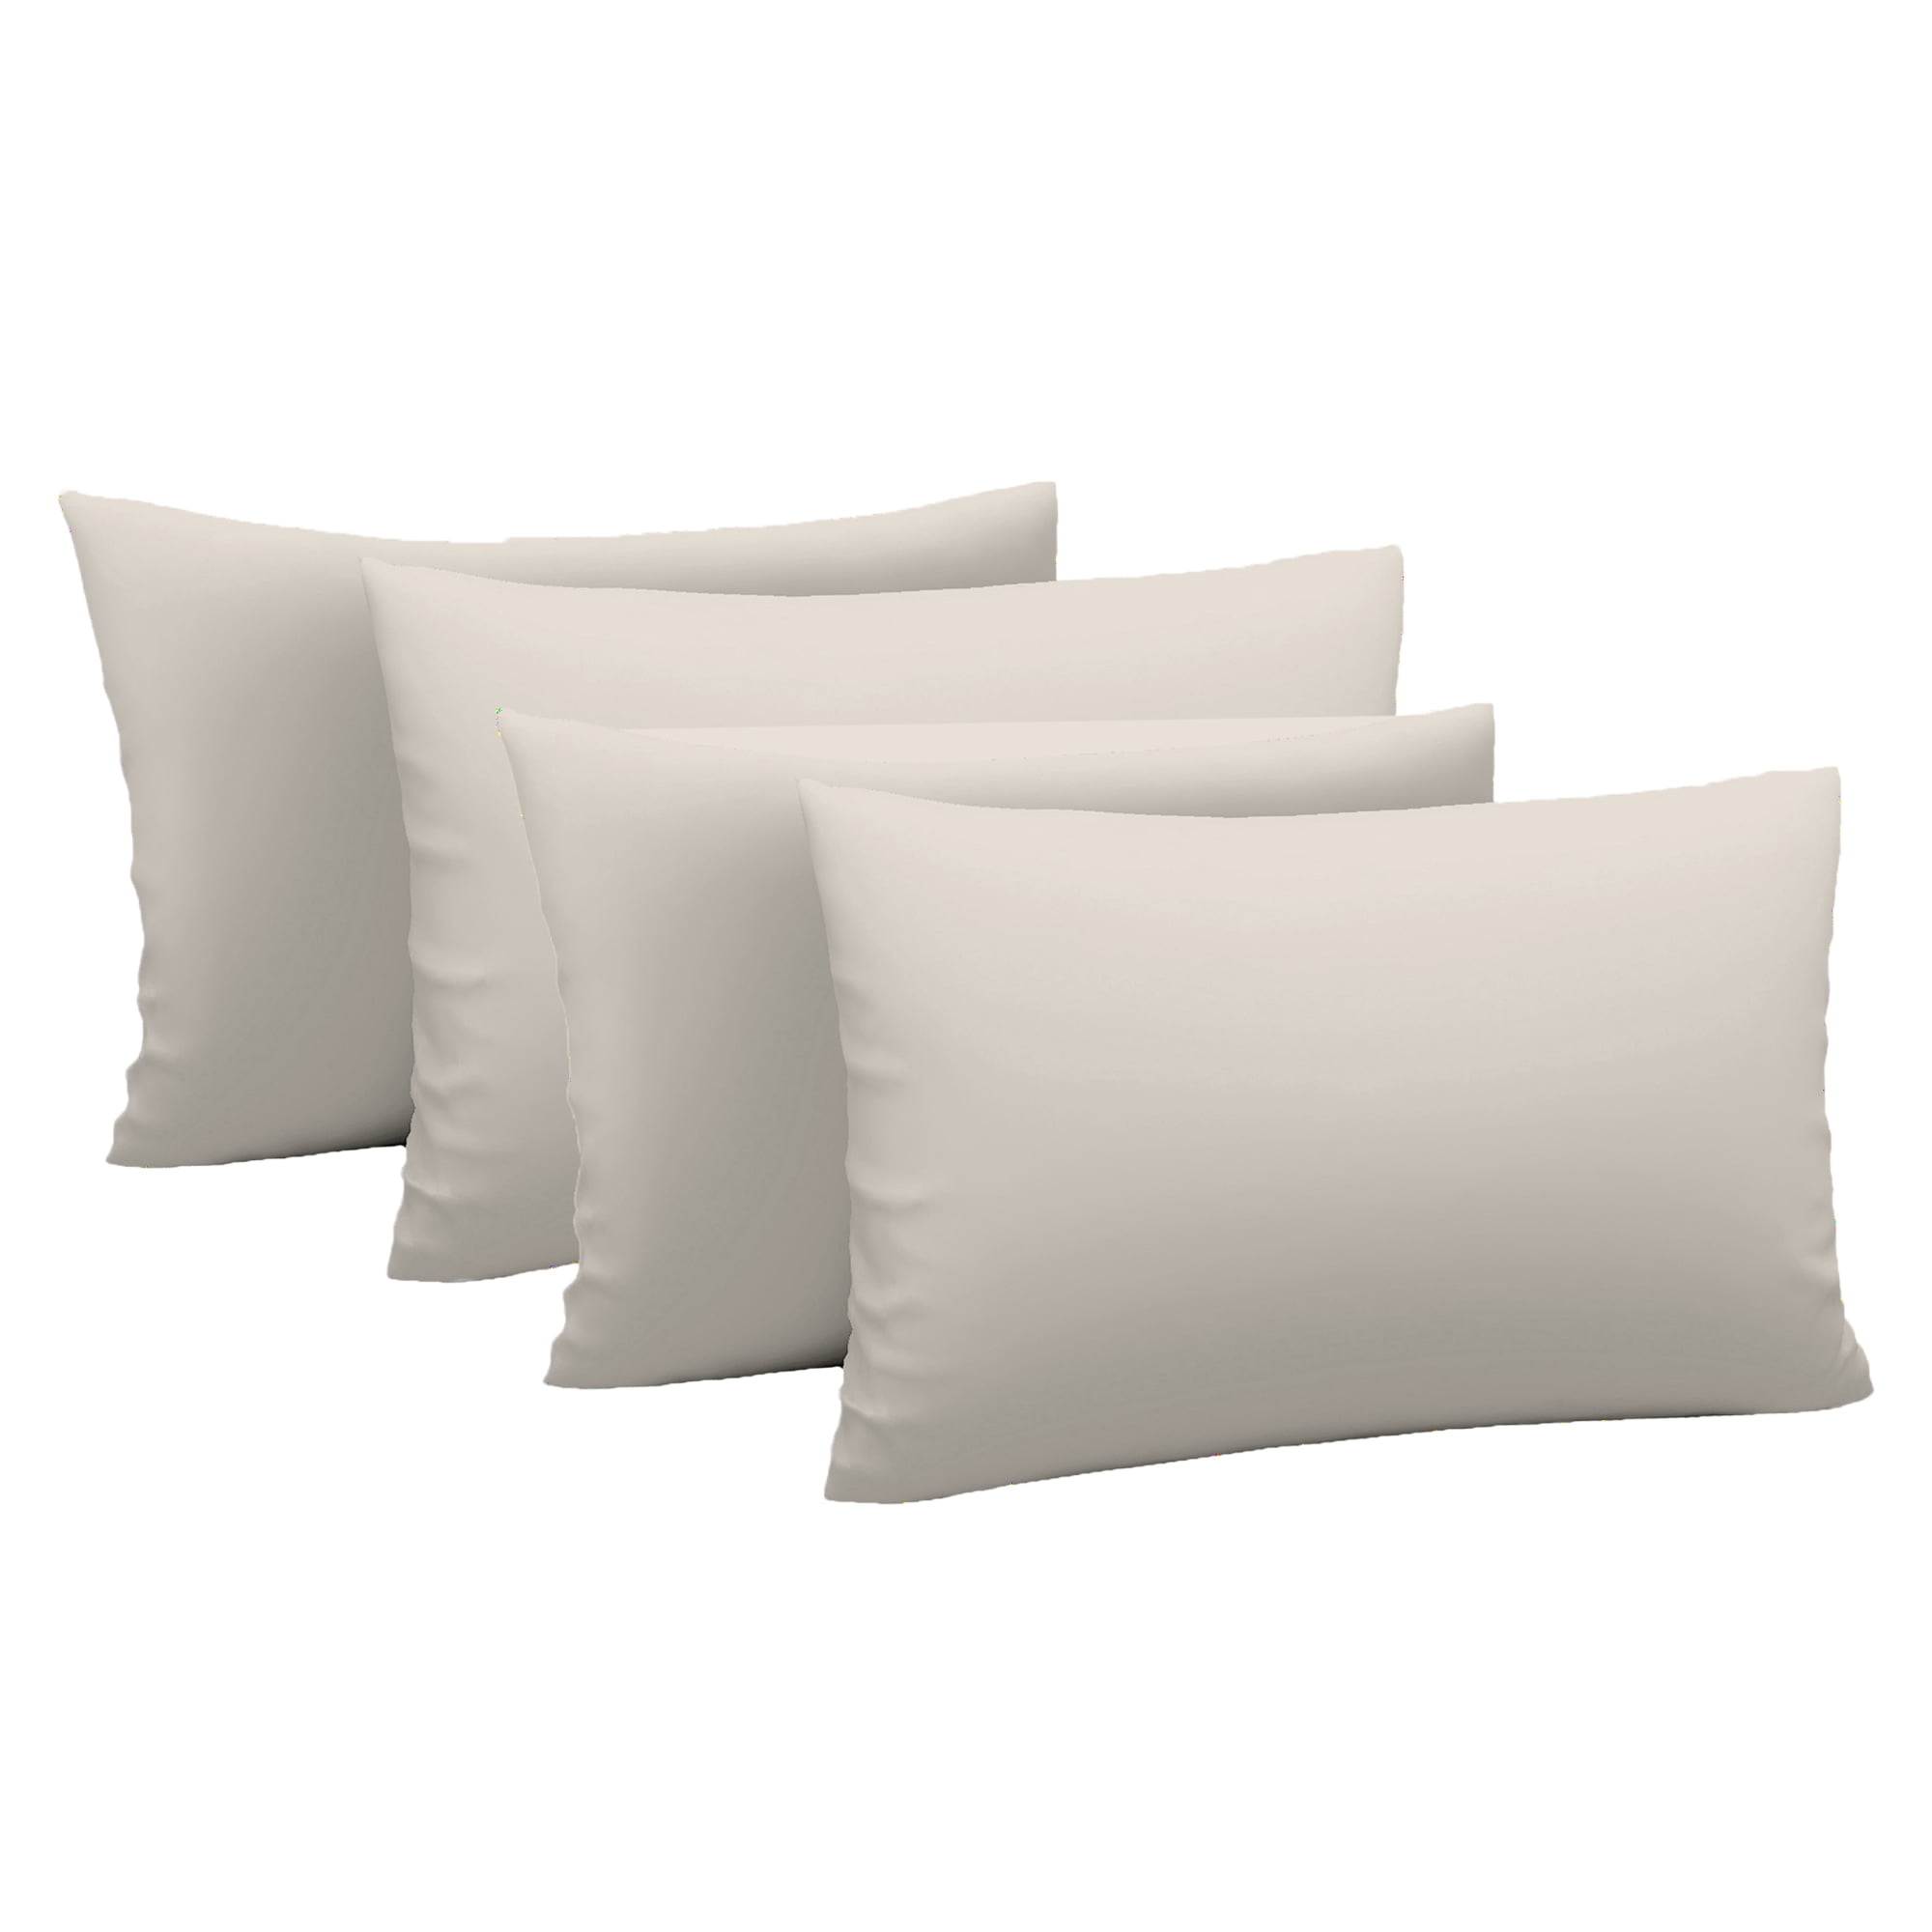 Full FlyingCart Brand New Hotel White Solid Color 500 Thread Count Standered Twin & Small 20 x 26 Size 2pcs Cover Pack Pillow Shams 100% Egyptian Cotton Pair Queen